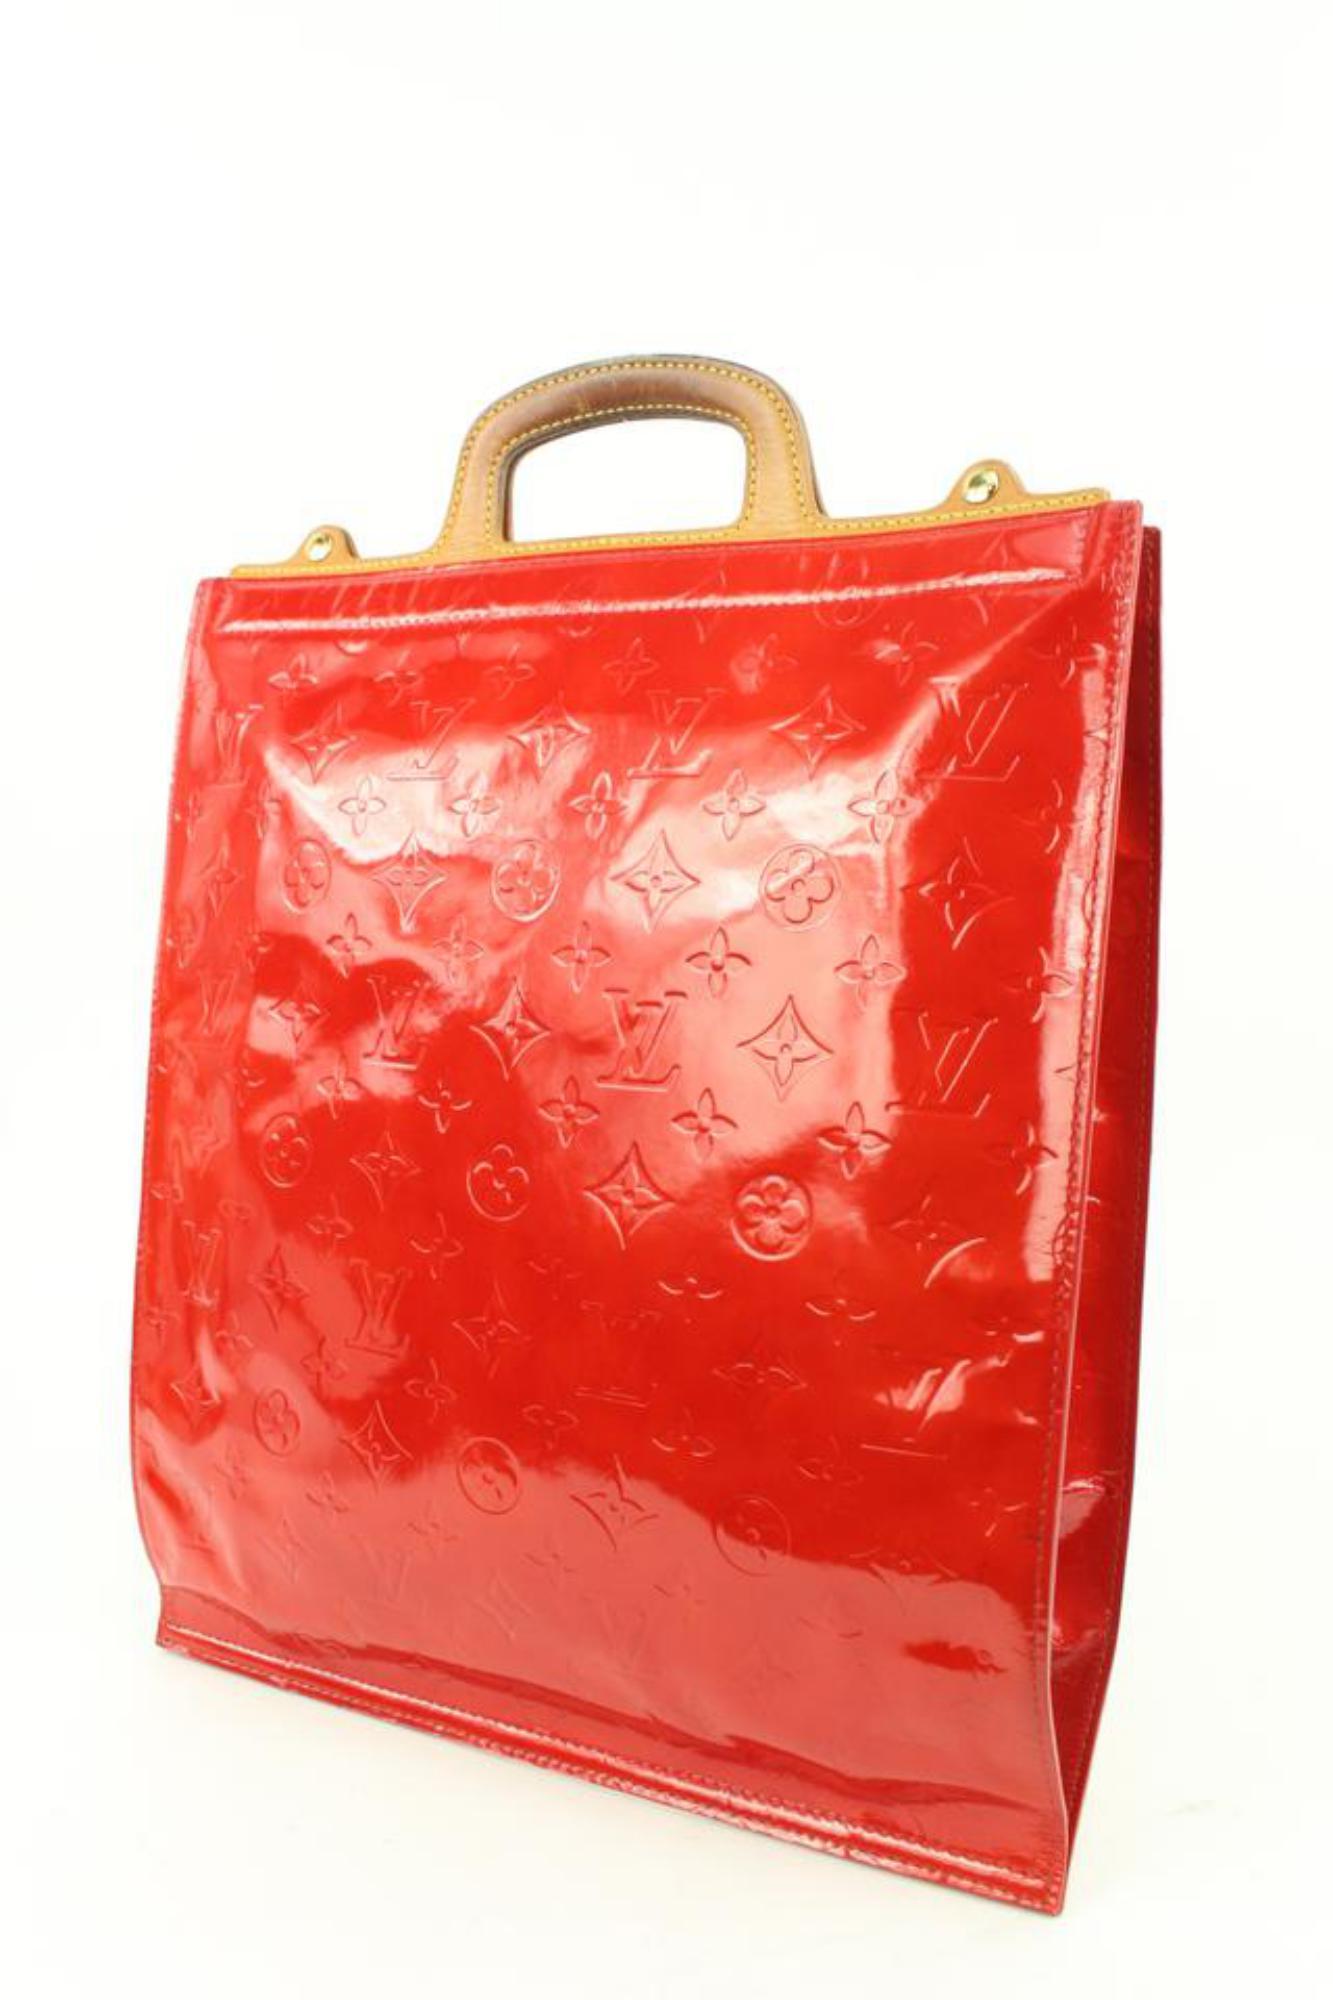 Louis Vuitton Red Monogram Vernis Stanton Tote Bag Upcycle Ready 329slk3
Date Code/Serial Number: TH1909
Made In: France
Measurements: Length:  12.2